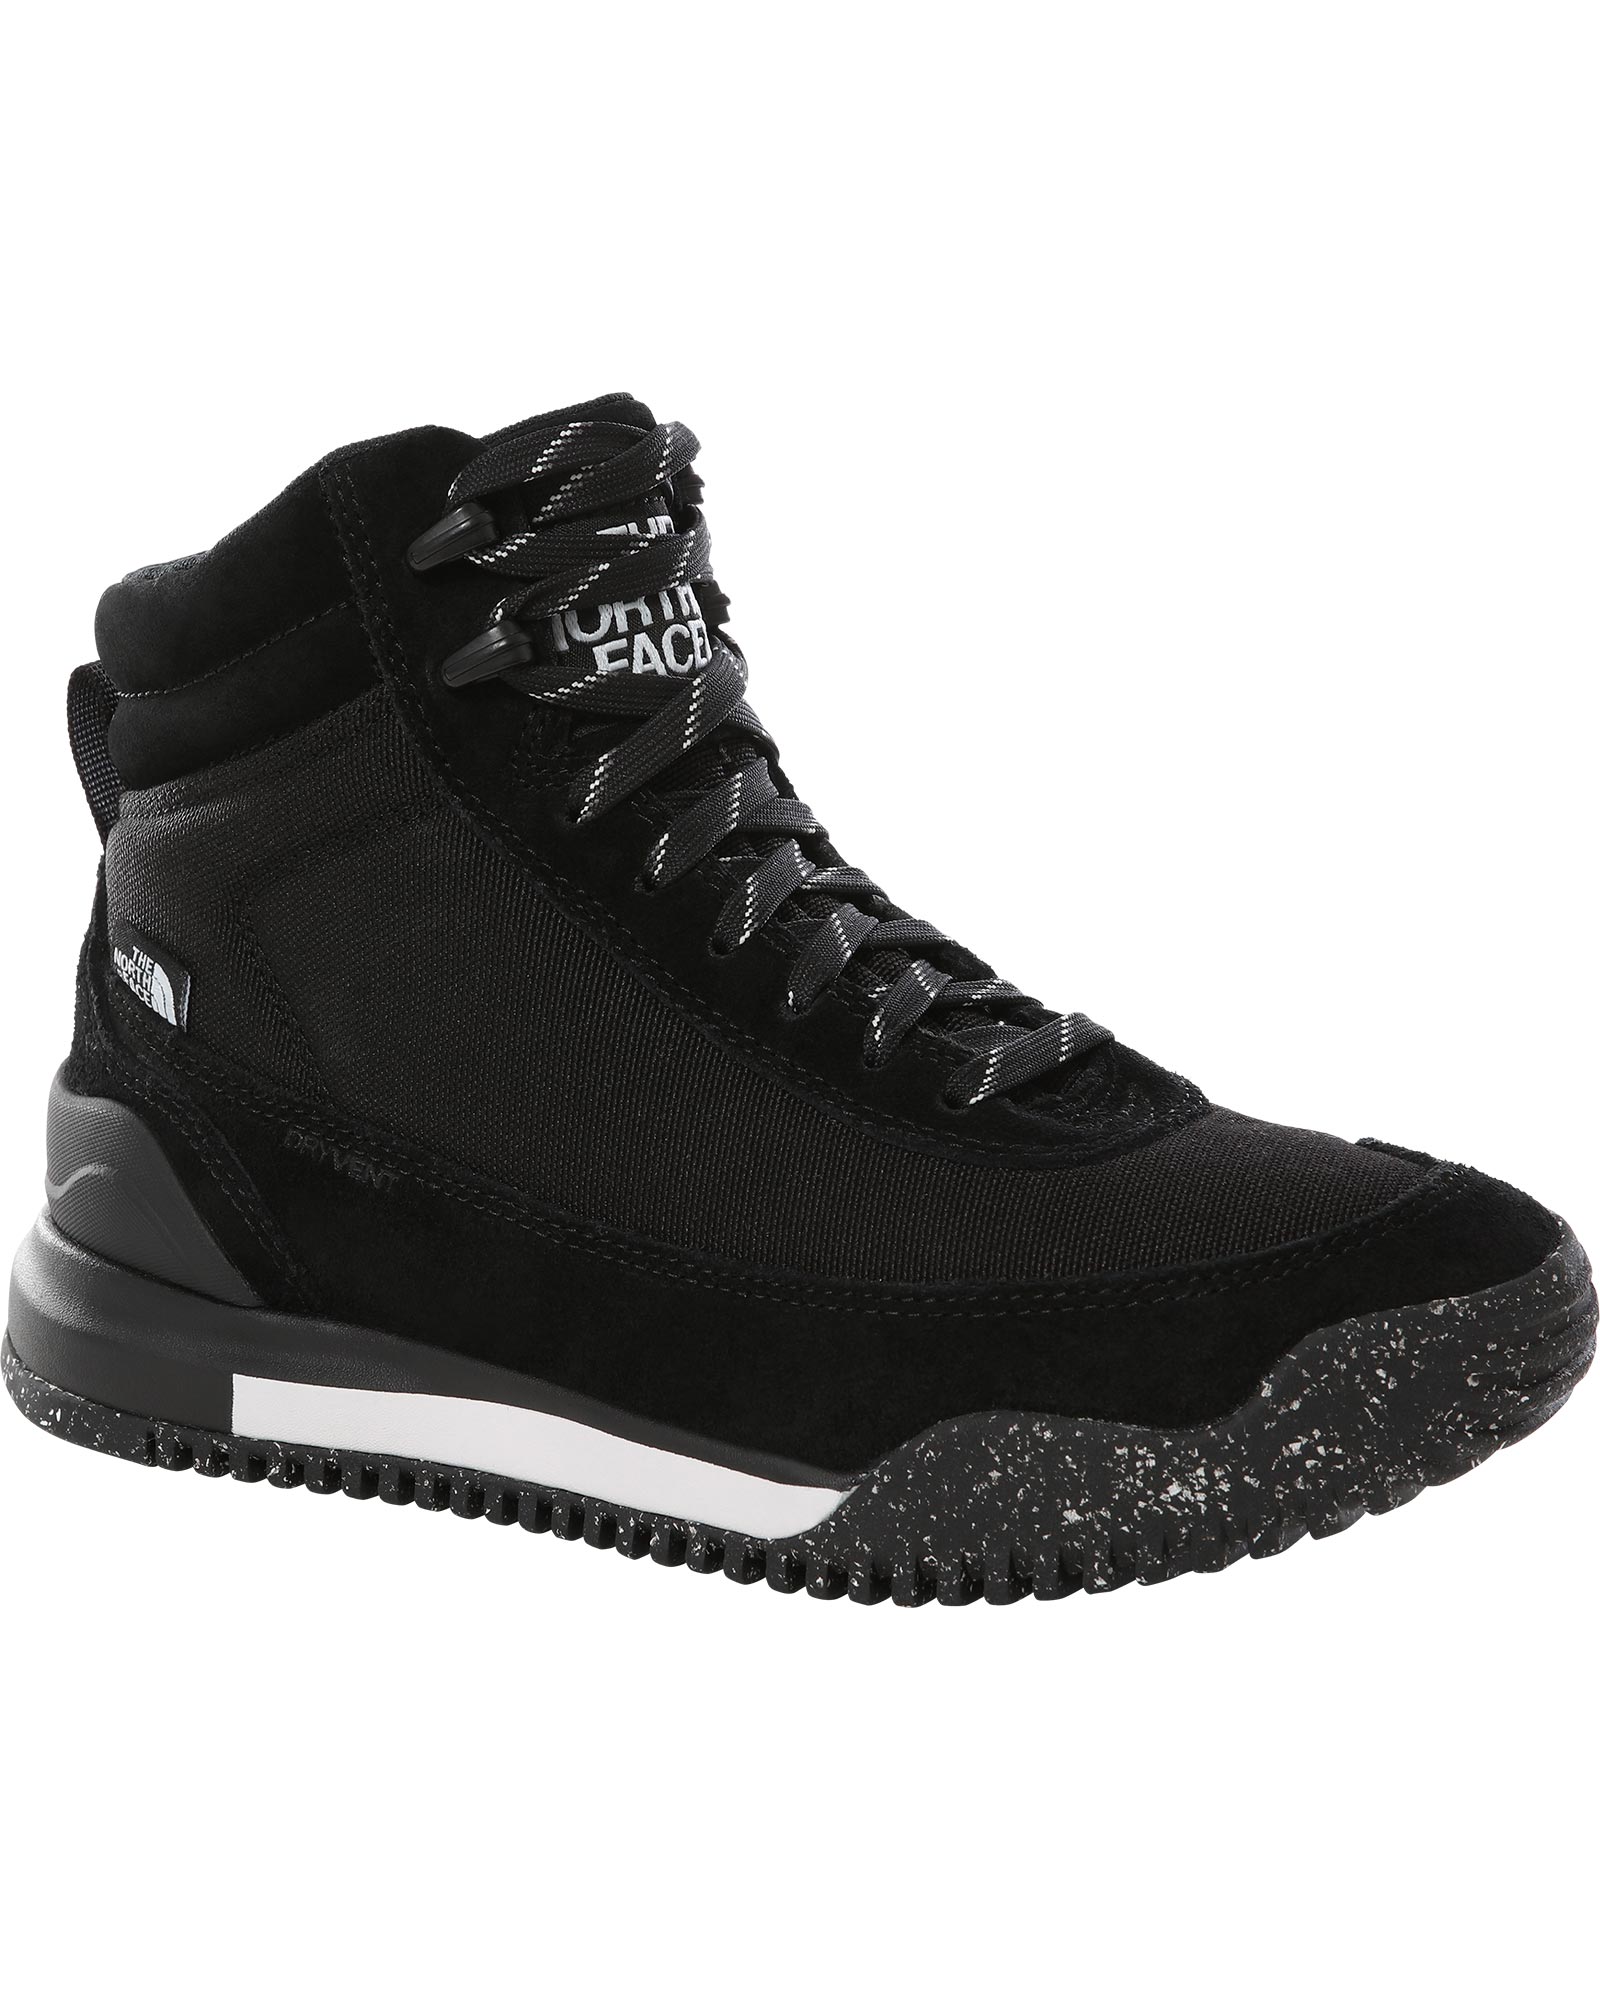 Product image of The North Face Back-to-Berkeley III Textile Women's Waterproof Boots